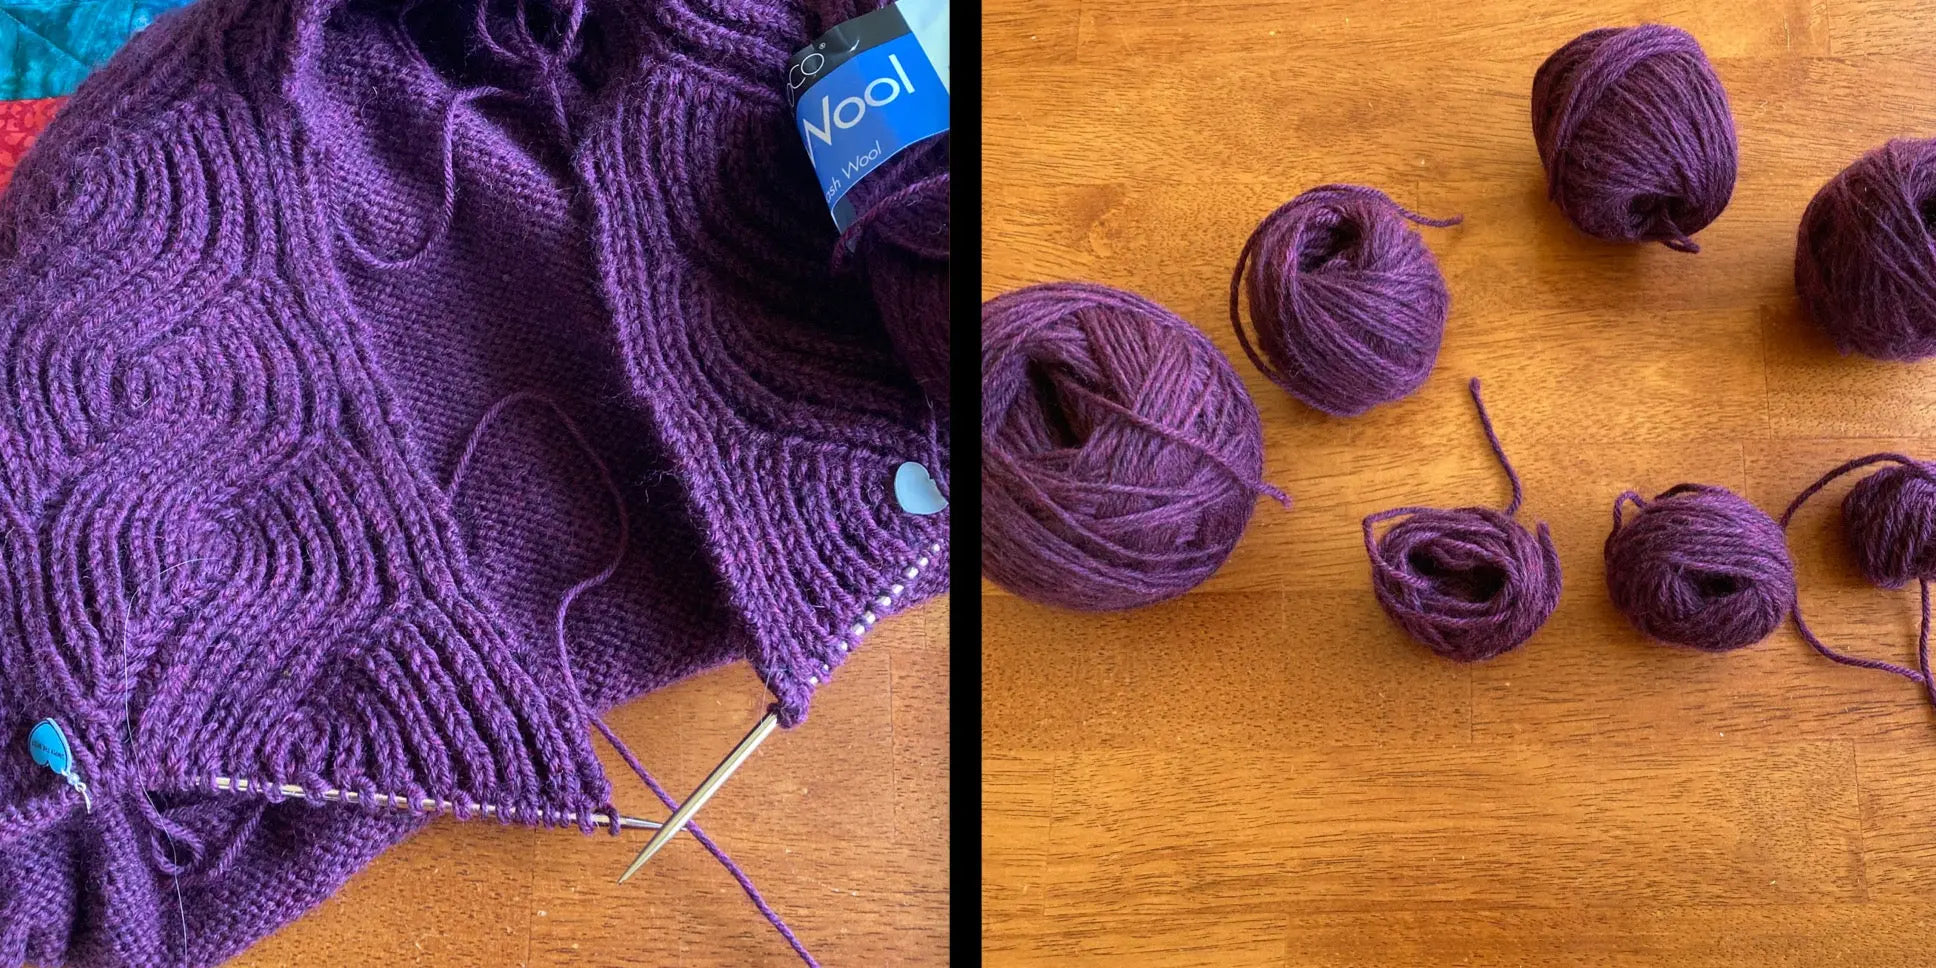 Split image of a partially completed deep plum sweater with brioche lapels on the left, and seven small hand wound balls on the right after the project was frogged in order to correct a catastrophic mistake.